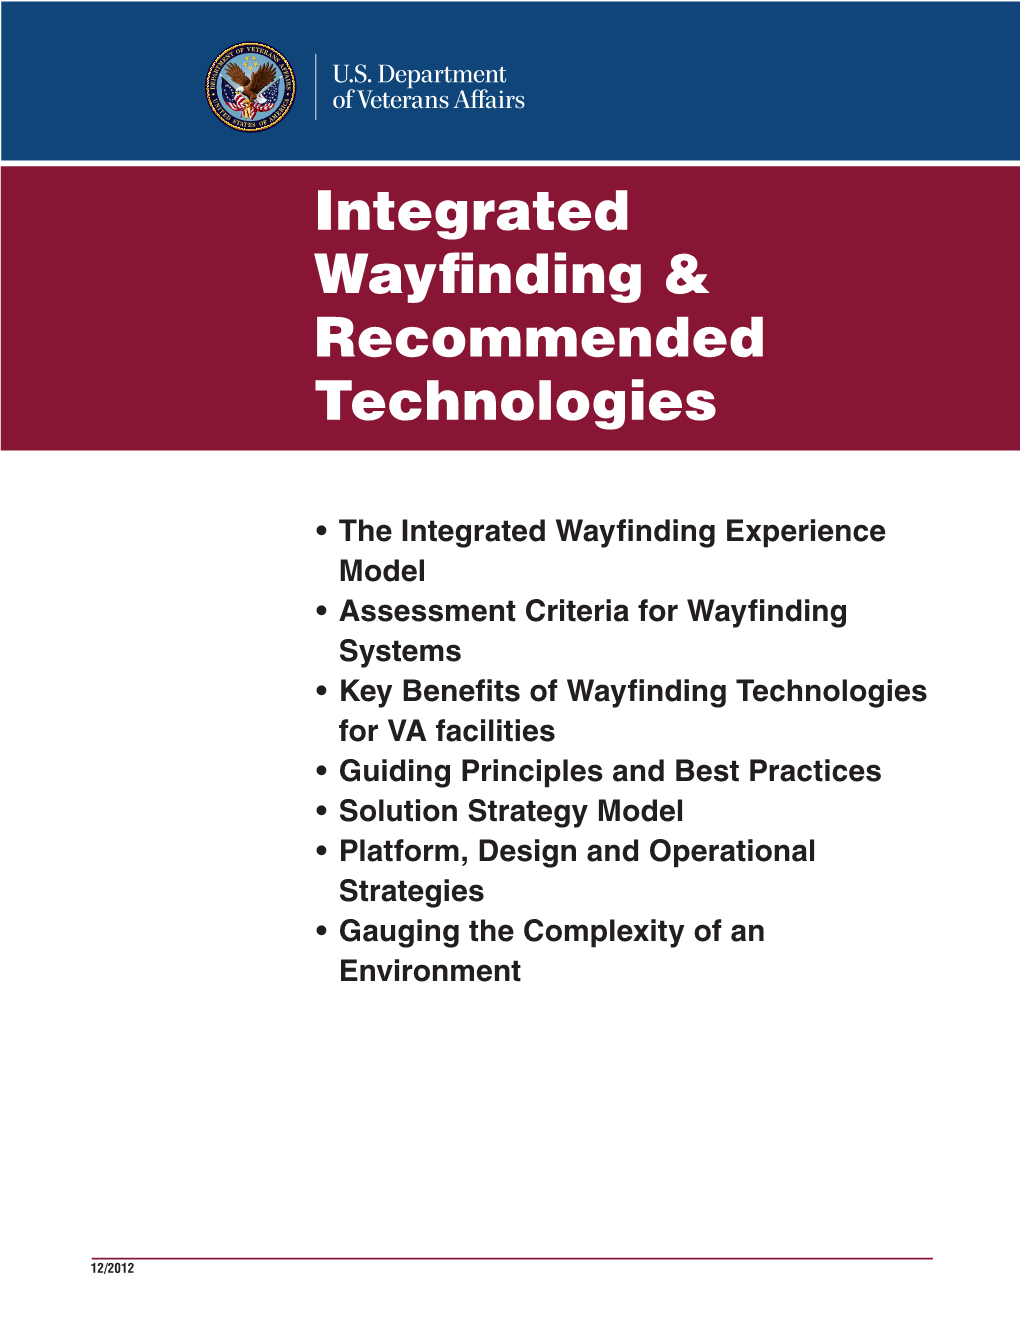 Integrated Wayfinding & Recommended Technologies